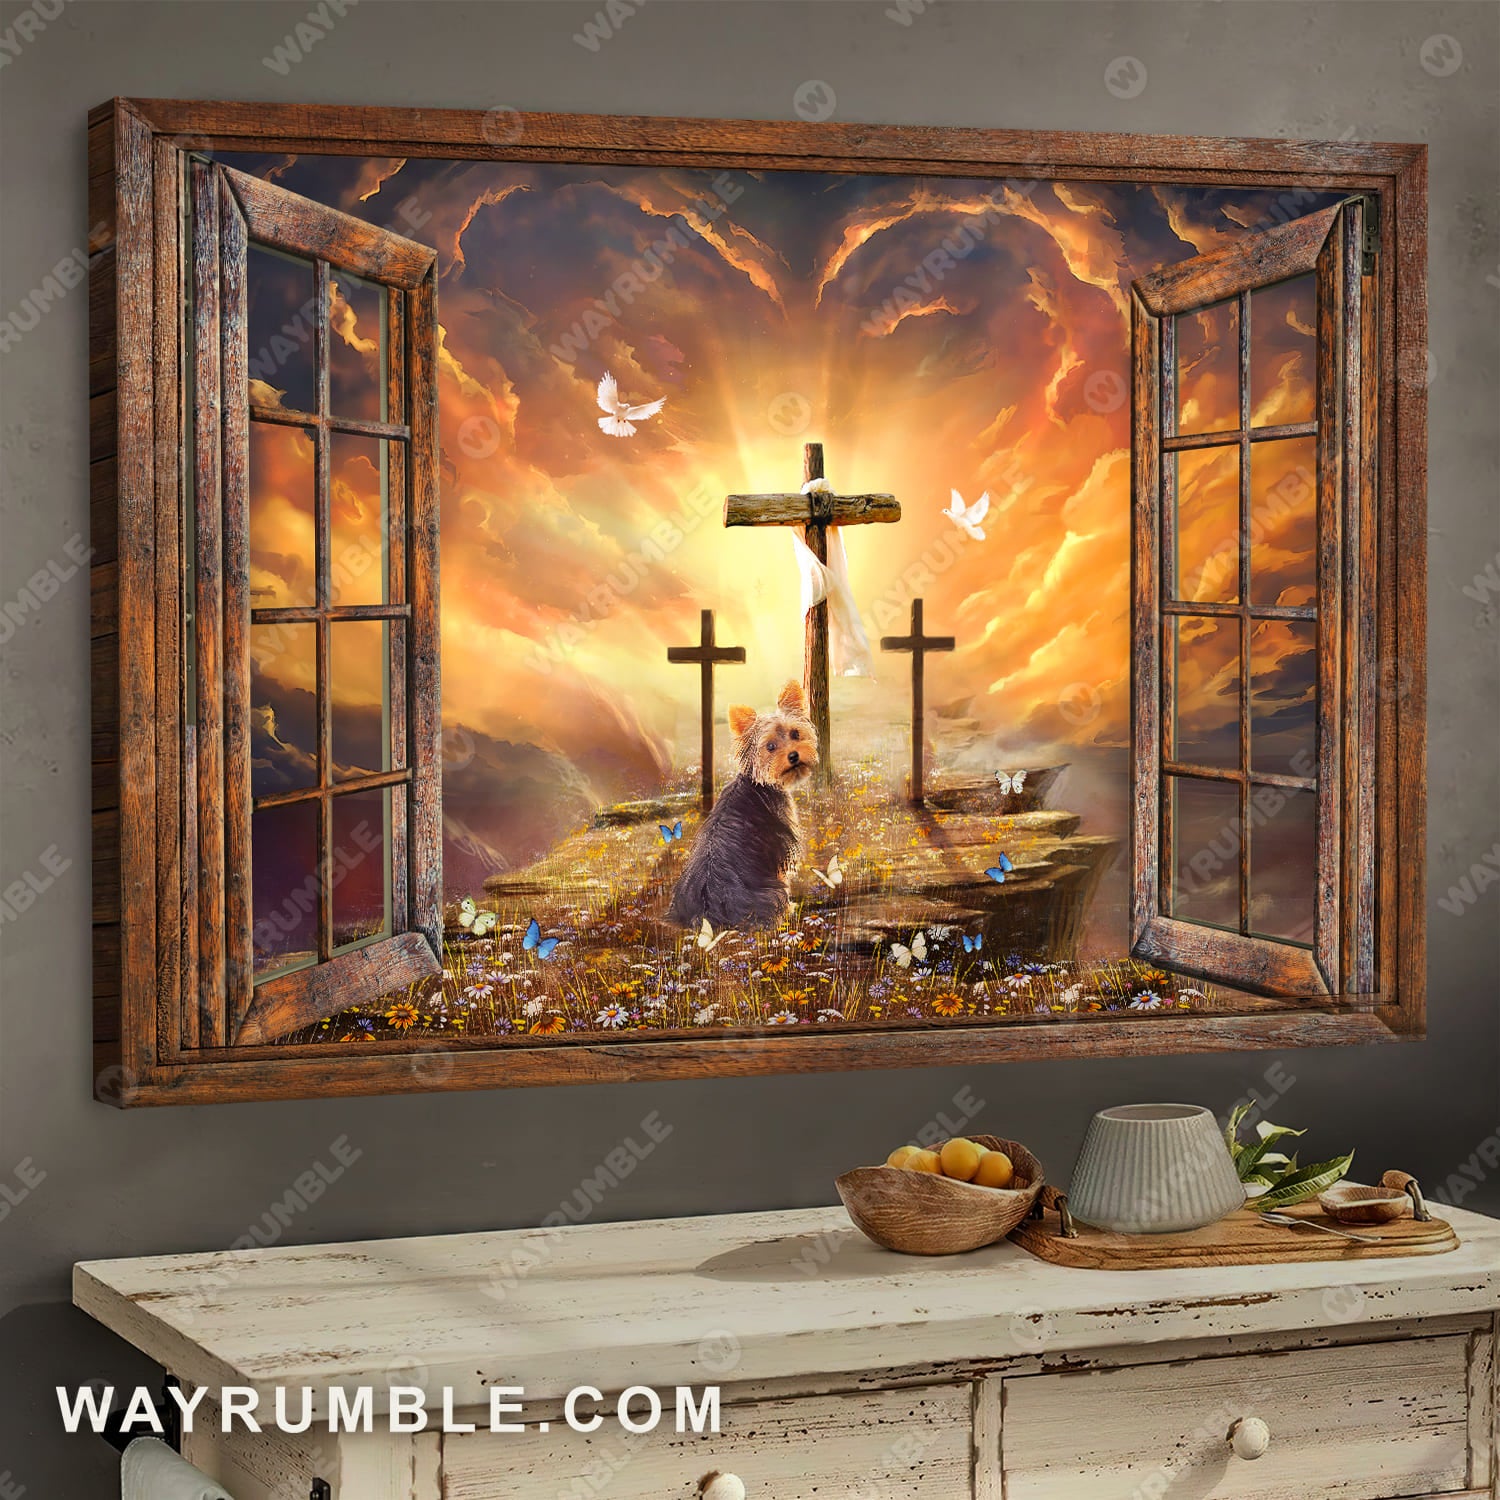 Yorkshire Terrier painting, Window frame, Sunset painting, Path to heaven, The three crosses - Jesus Landscape Canvas Prints, Wall Art